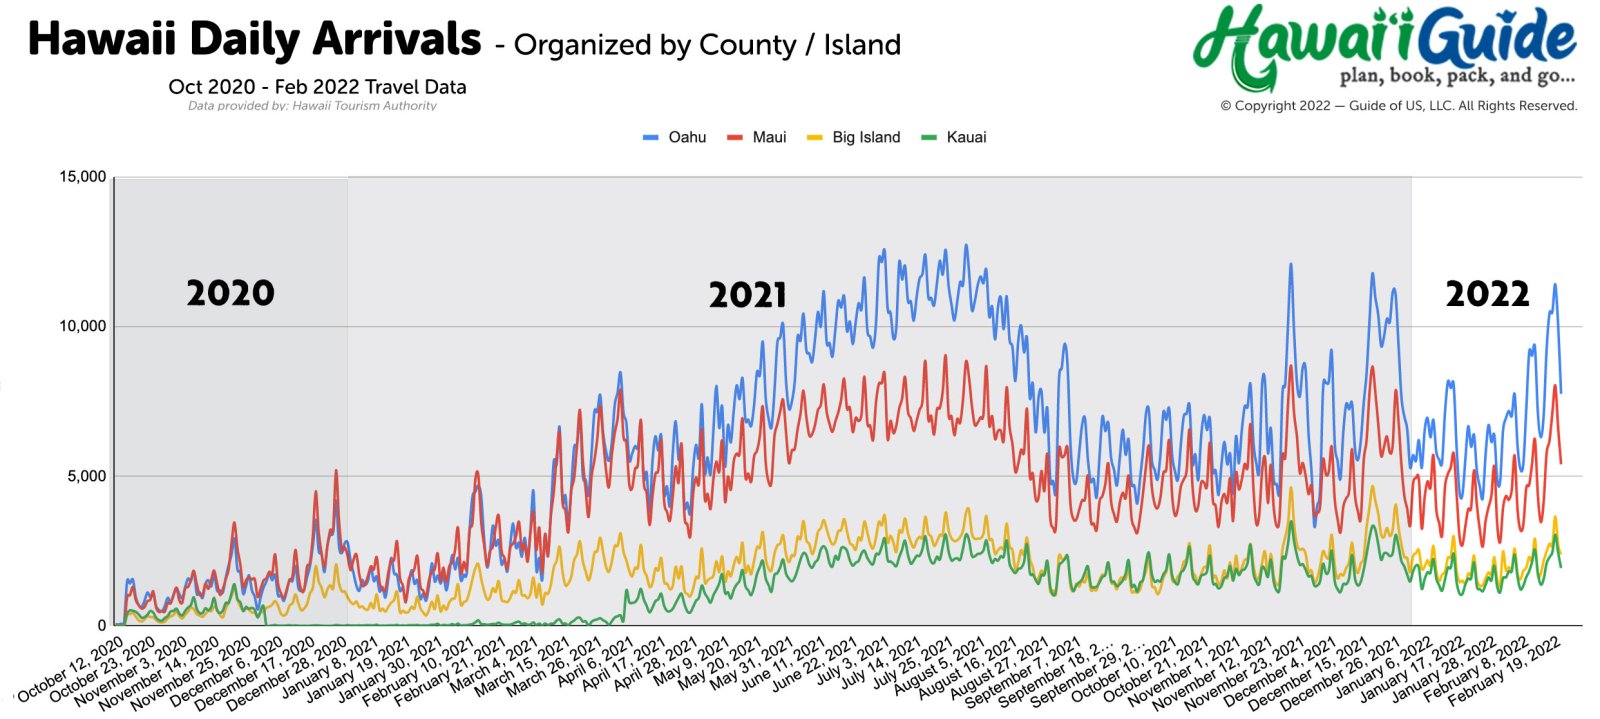 Hawaii Visitor Arrivals by Island (click to enlarge)